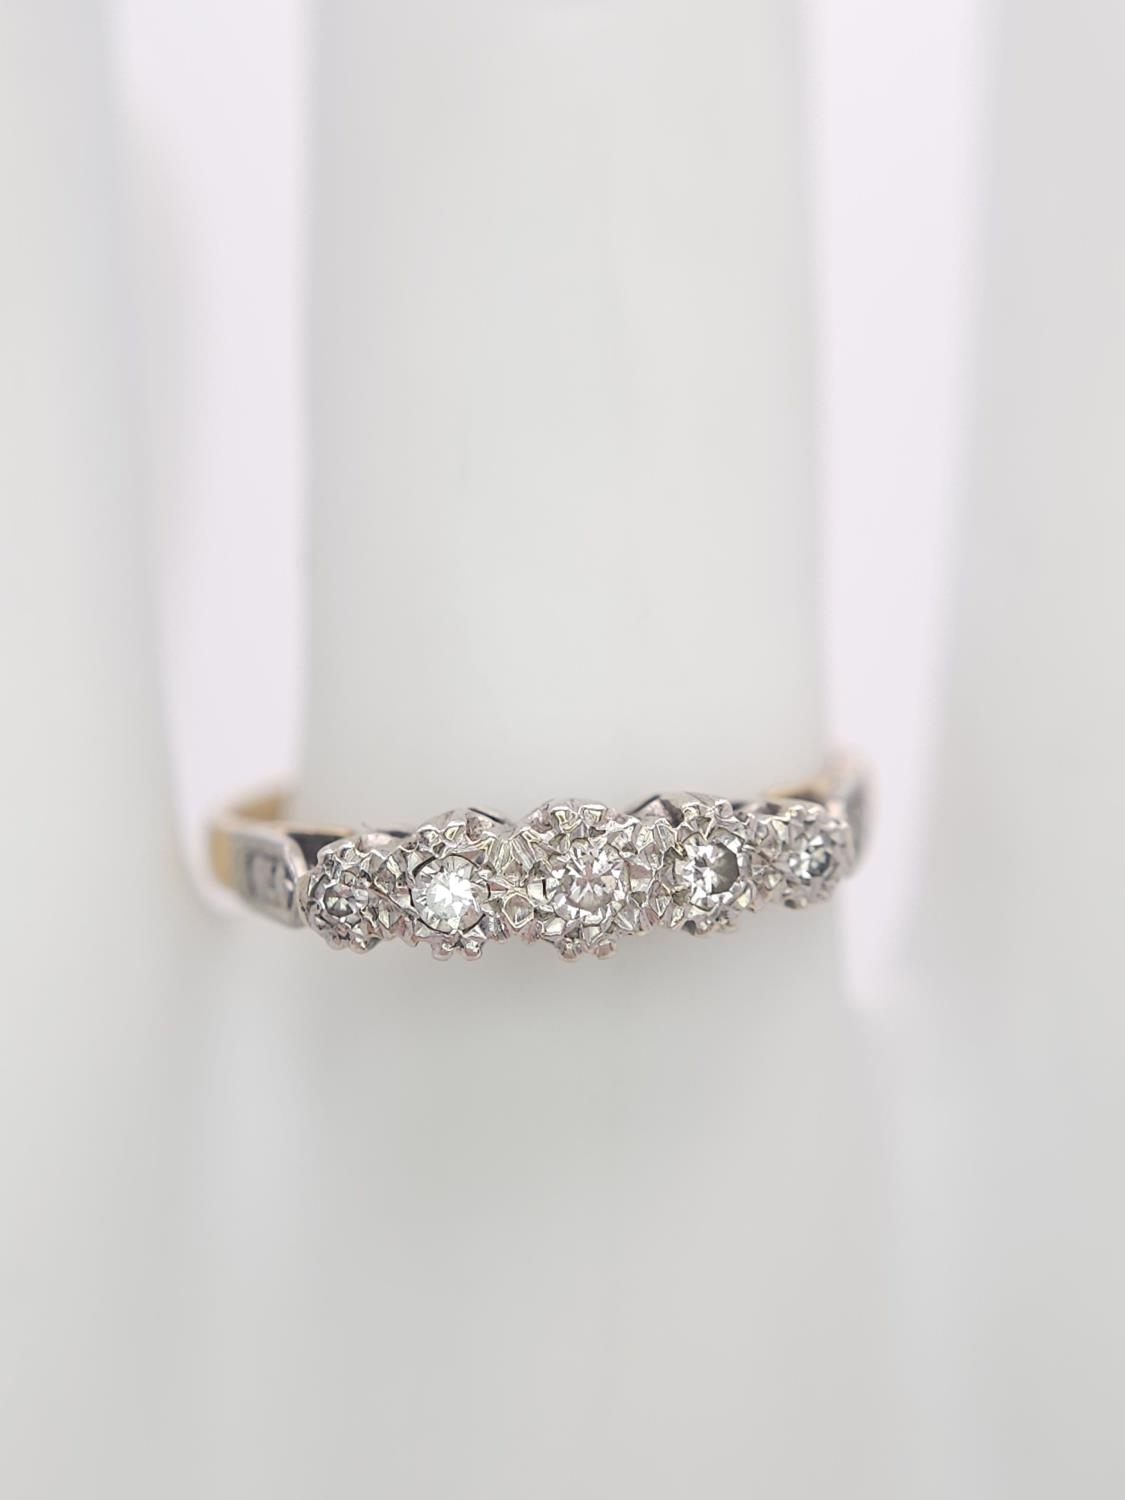 A Vintage 18K Gold and Platinum Five Diamond Ring. Size Q. 2.9g total weight. - Image 5 of 7